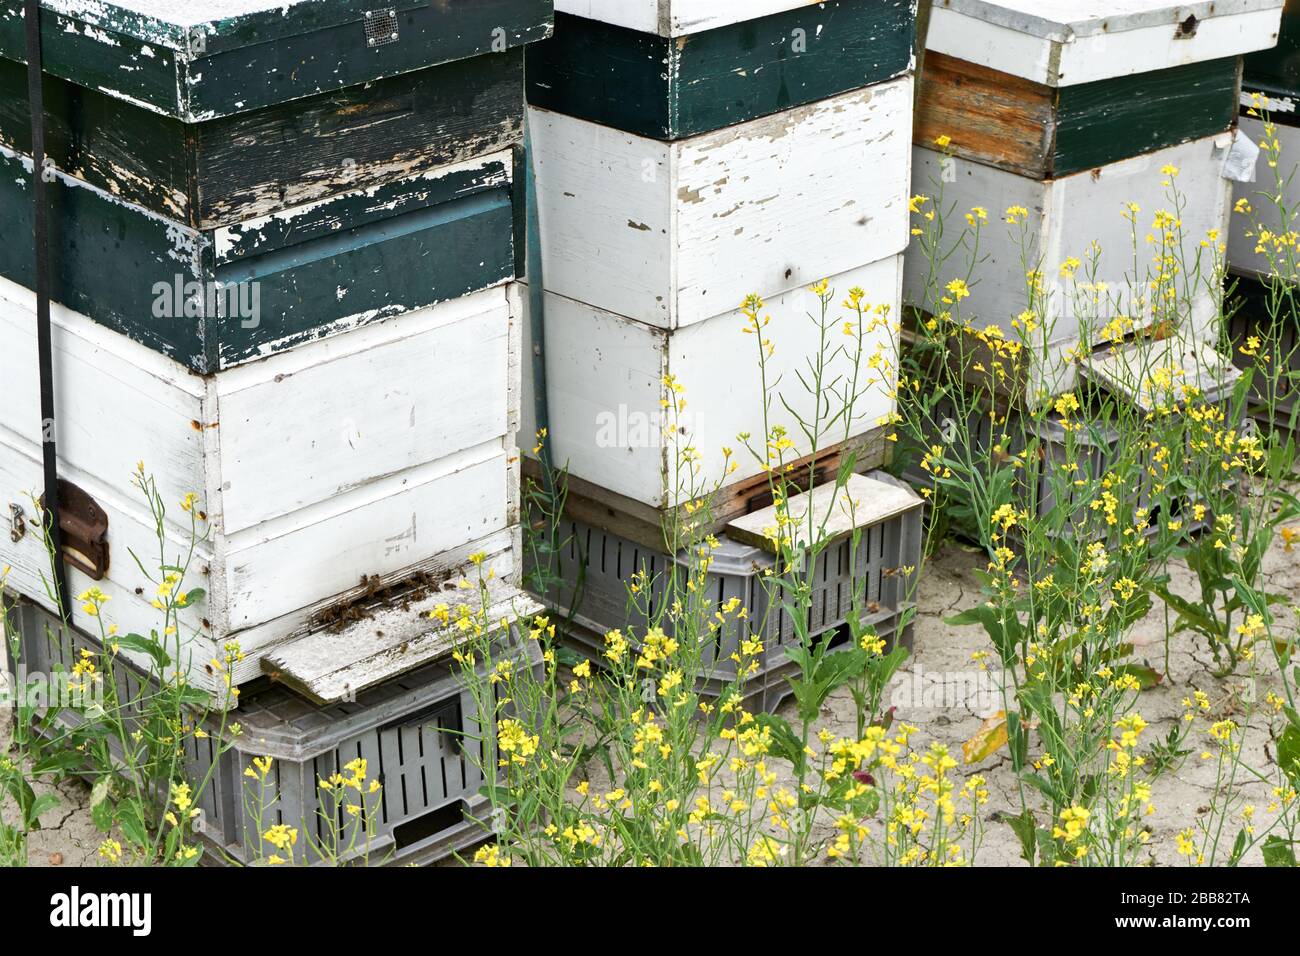 Beehives in a row. Three old weathered white and green beehives or honeycombs with honey bees surrounded with yellow rapeseed flowers. Stock Photo